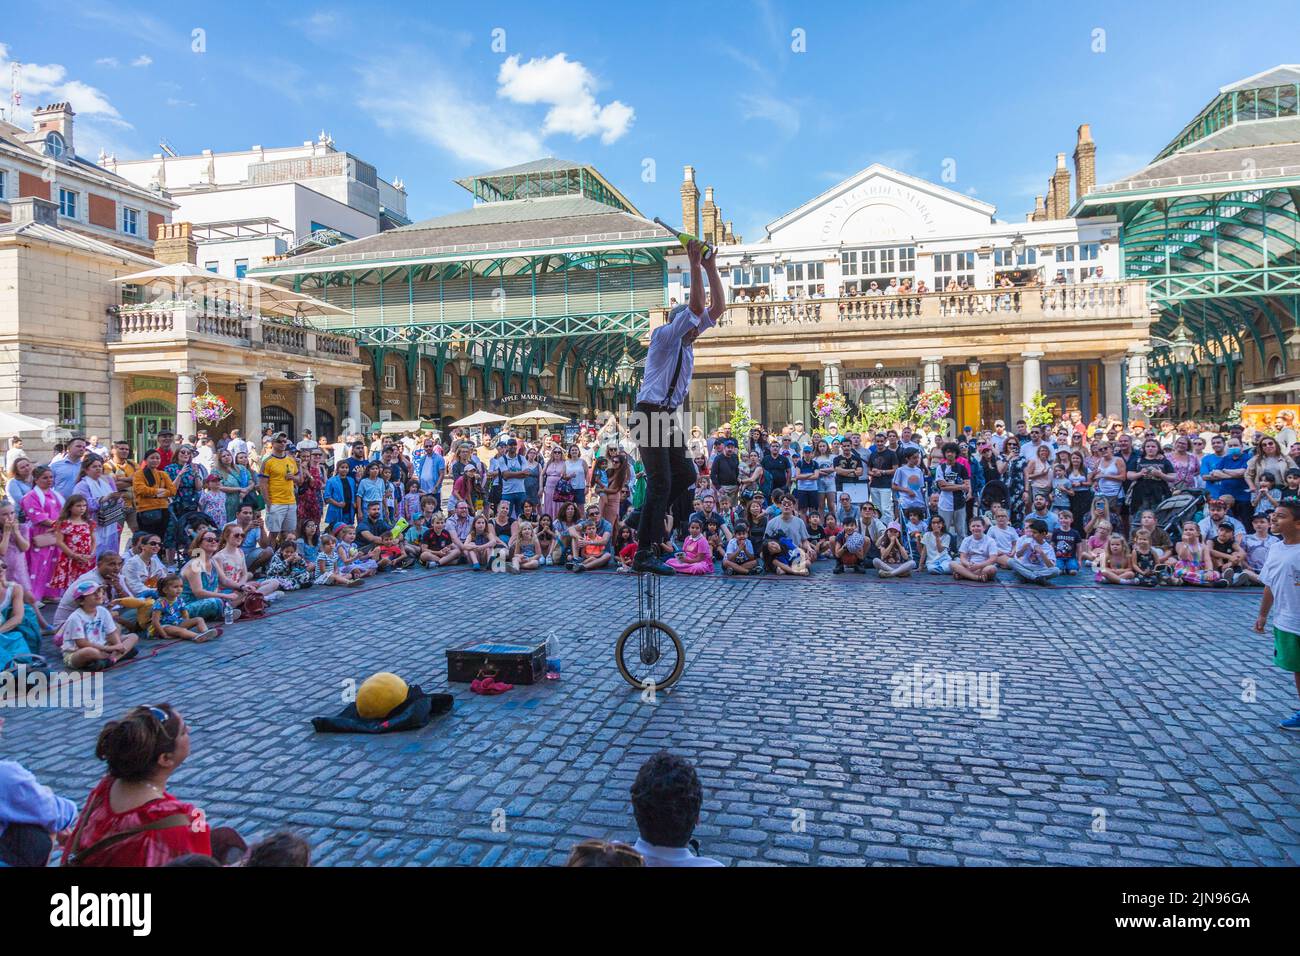 A male juggler entertaining crowds on a unicycle in Covent Garden,London,England,UK Stock Photo